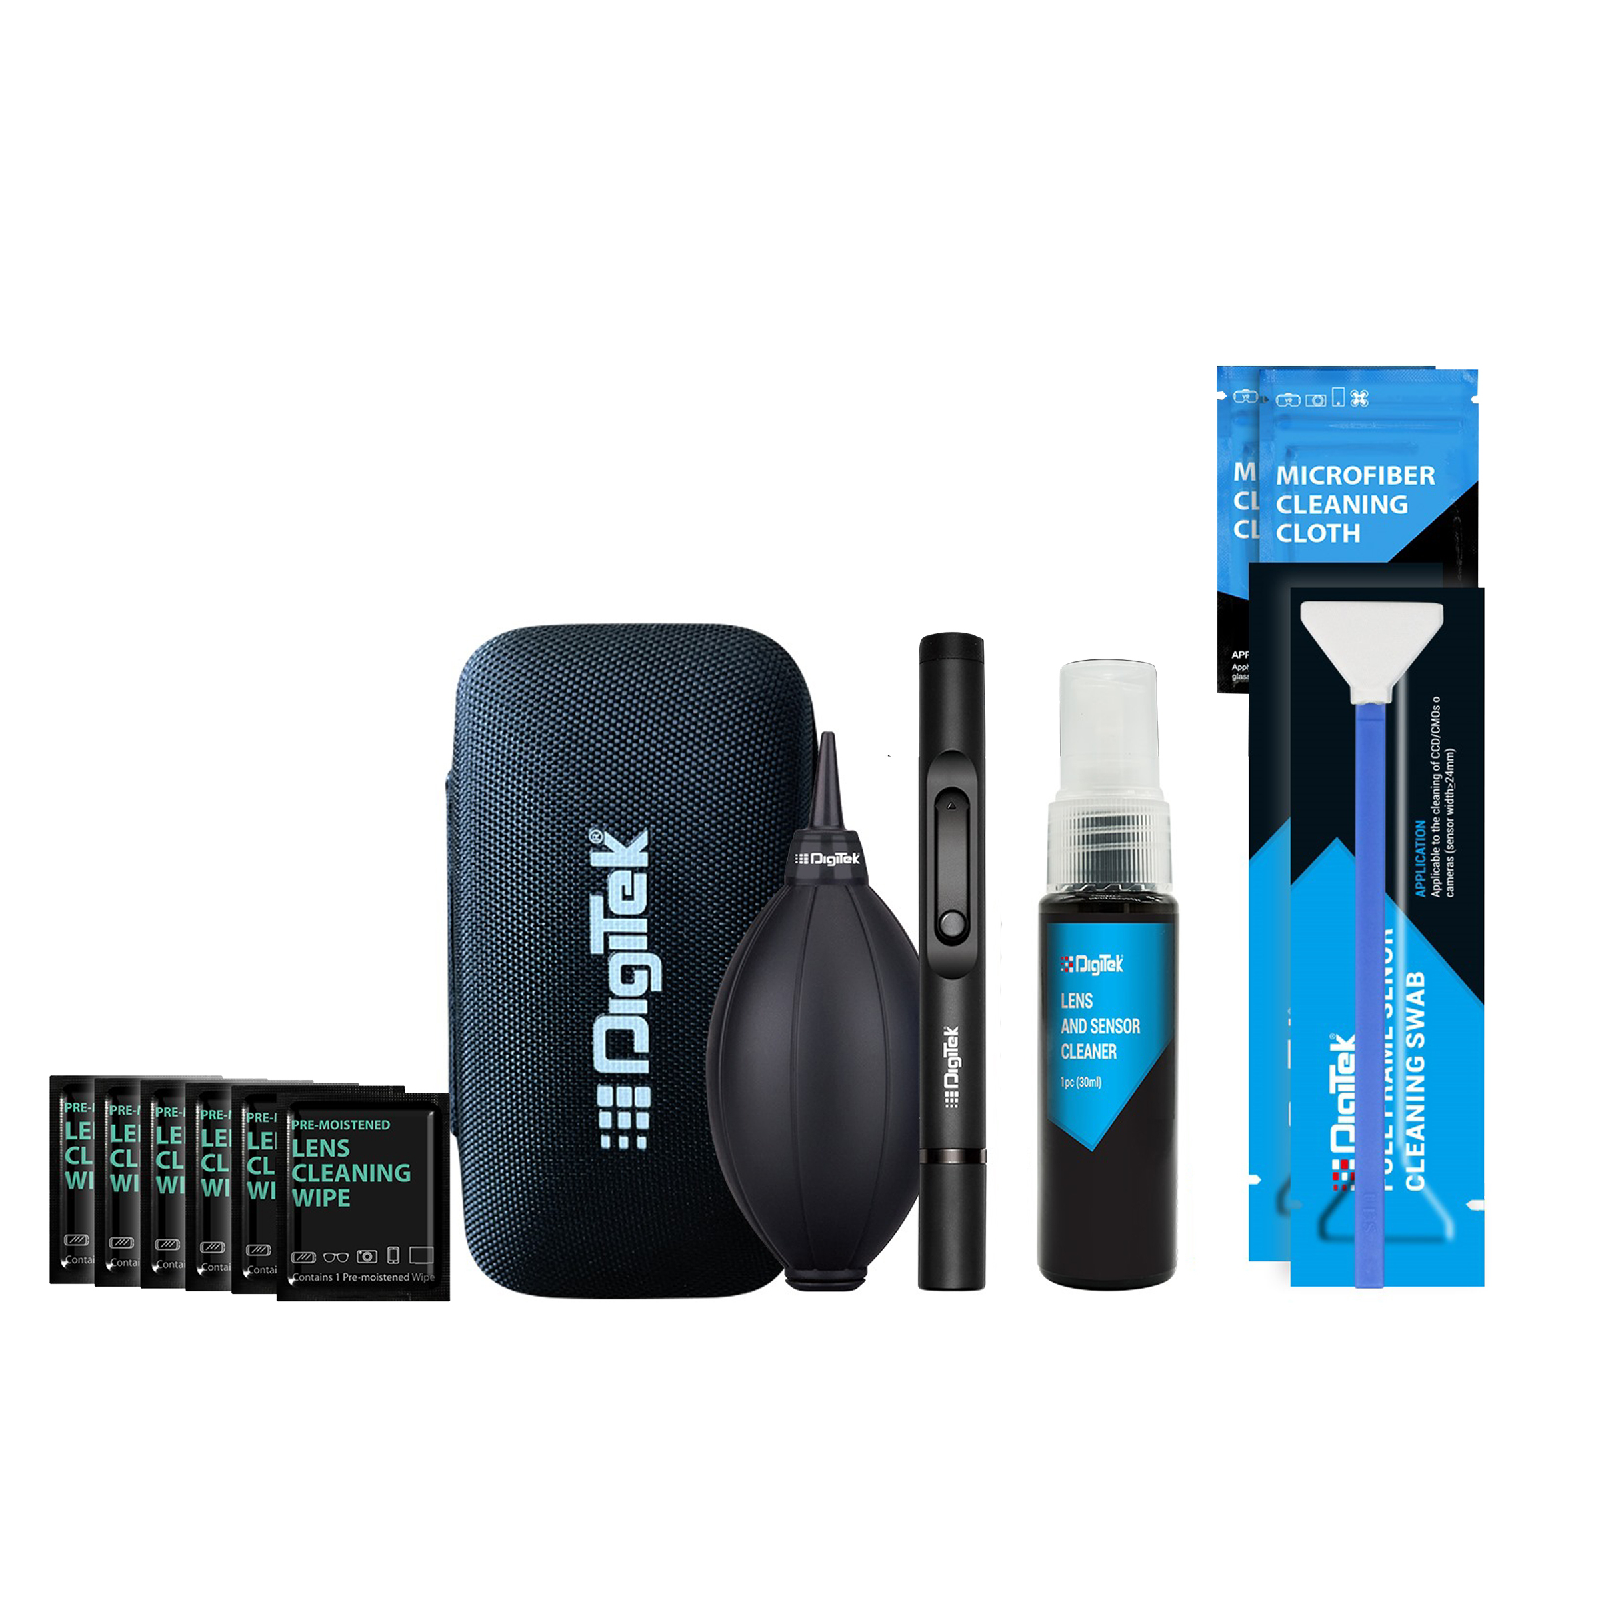 Digitek (DCK-004) Professional 8-in-1 Camera Cleaning Travel Kit, Ideal for Cleaning Lenses, Cameras, Filters, Displays